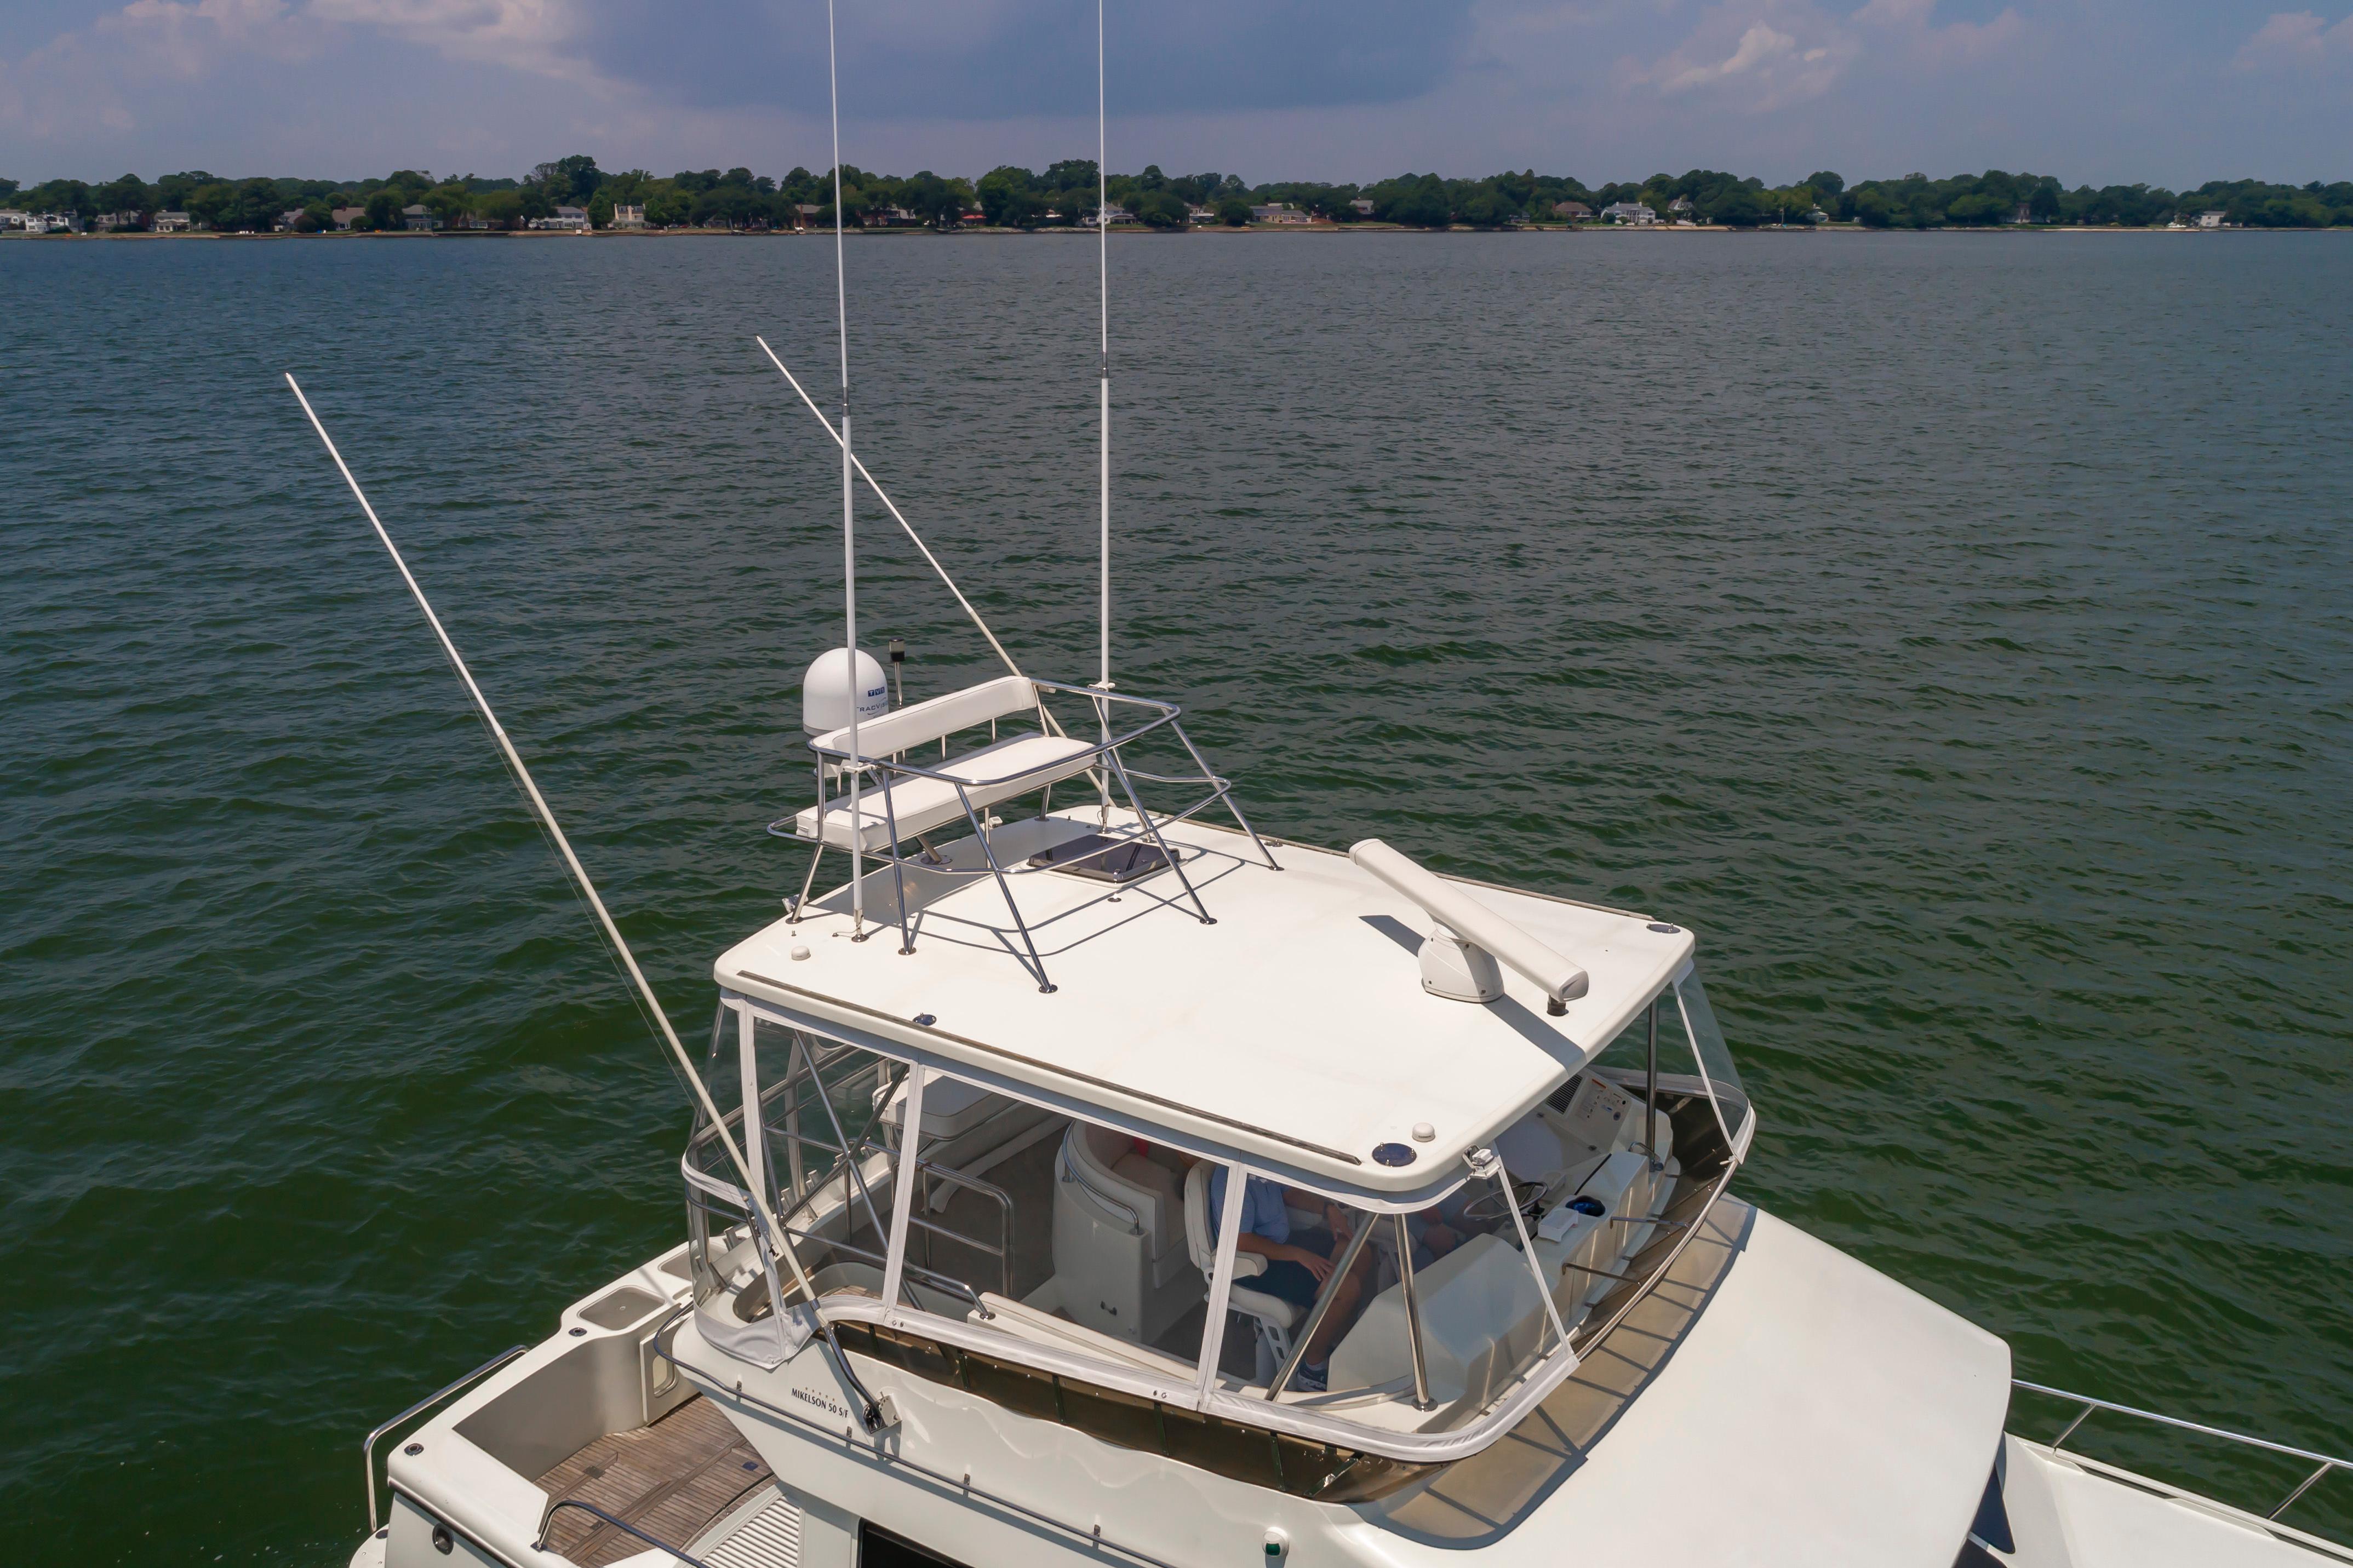 2016 Mikelson 50' S/F, upper deck "Crows Nest"